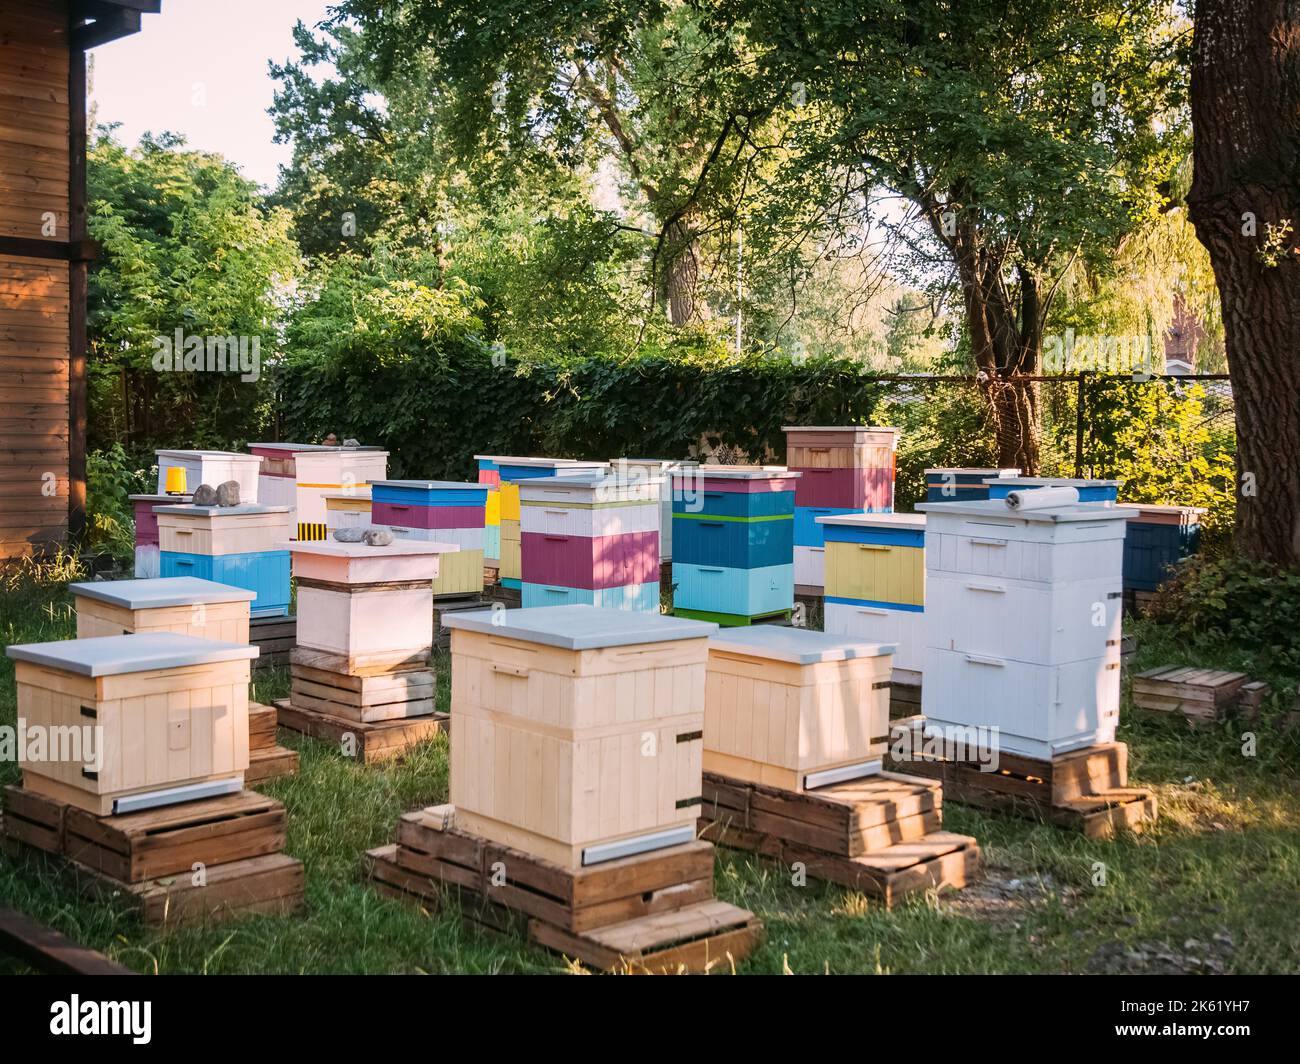 countryside apiary apiculture village natural Stock Photo